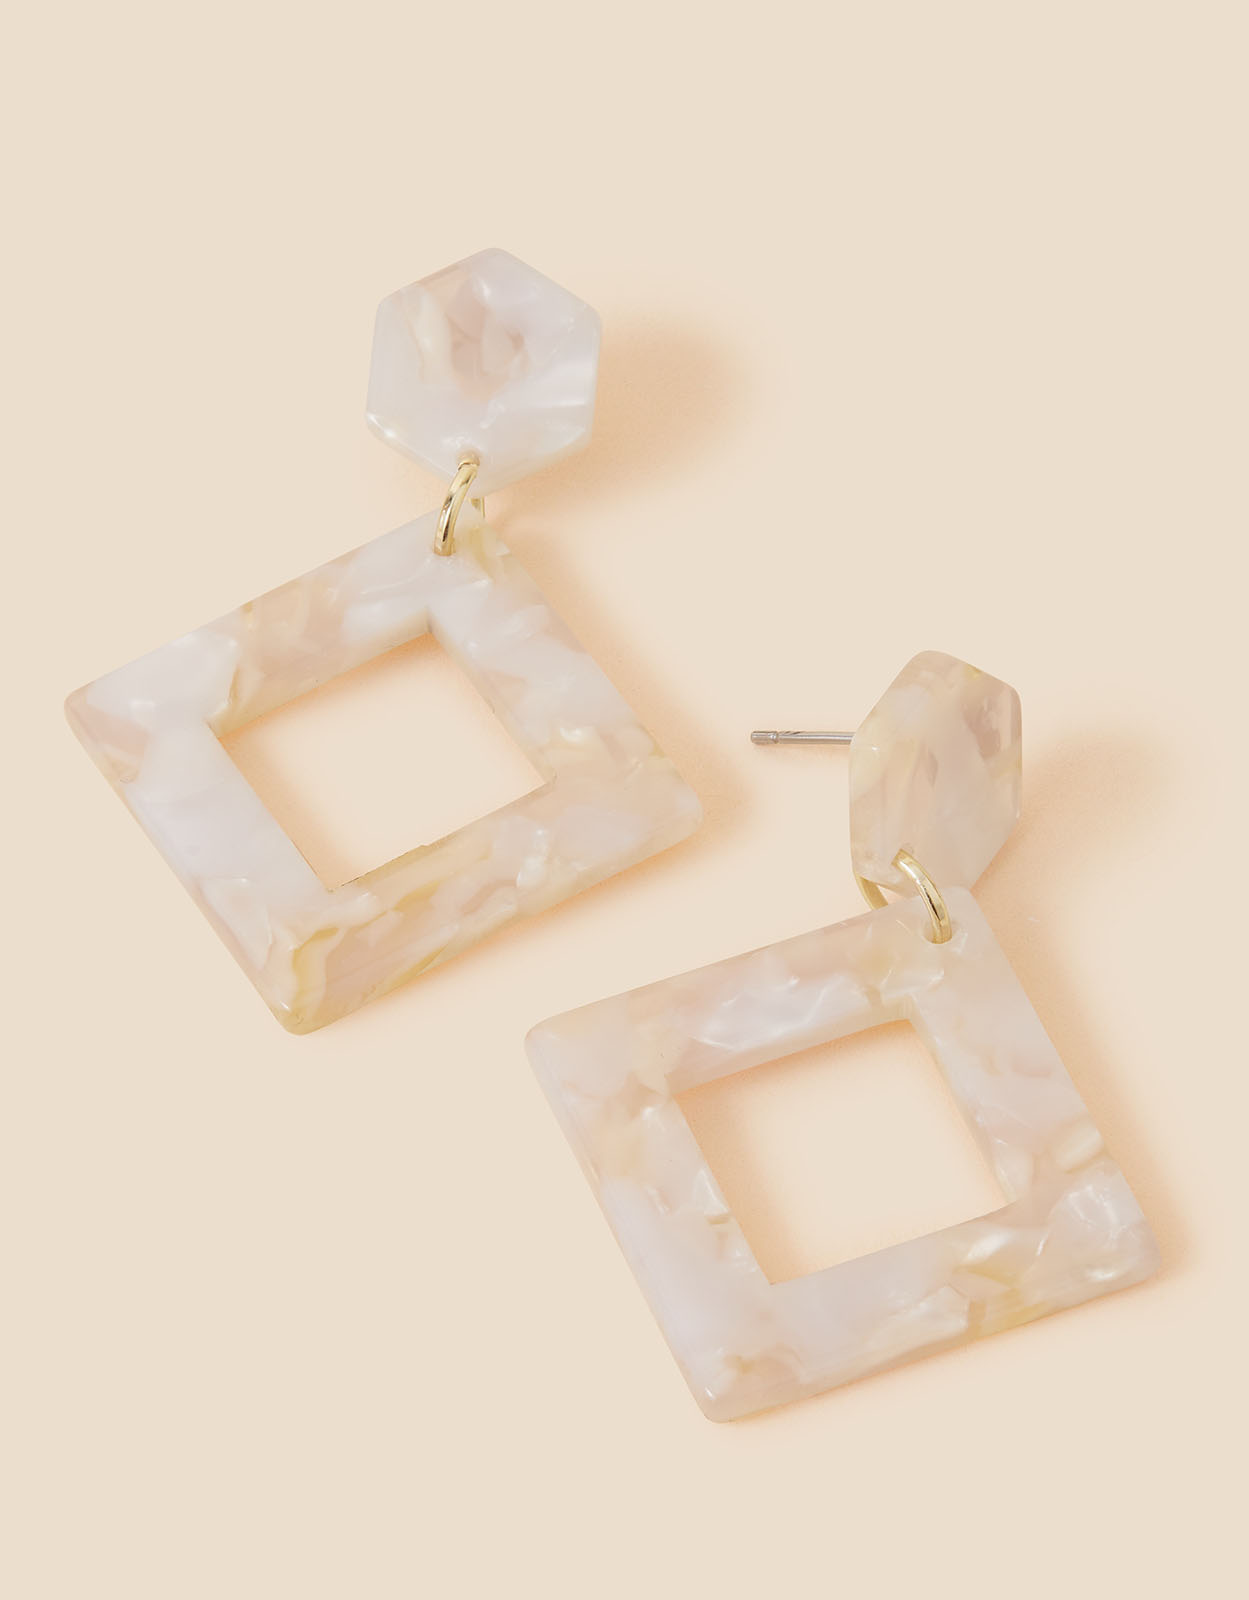 Accessorize Women's White/Light Brown Marbled Resin Square Drop Earrings, Size: L 5 cm